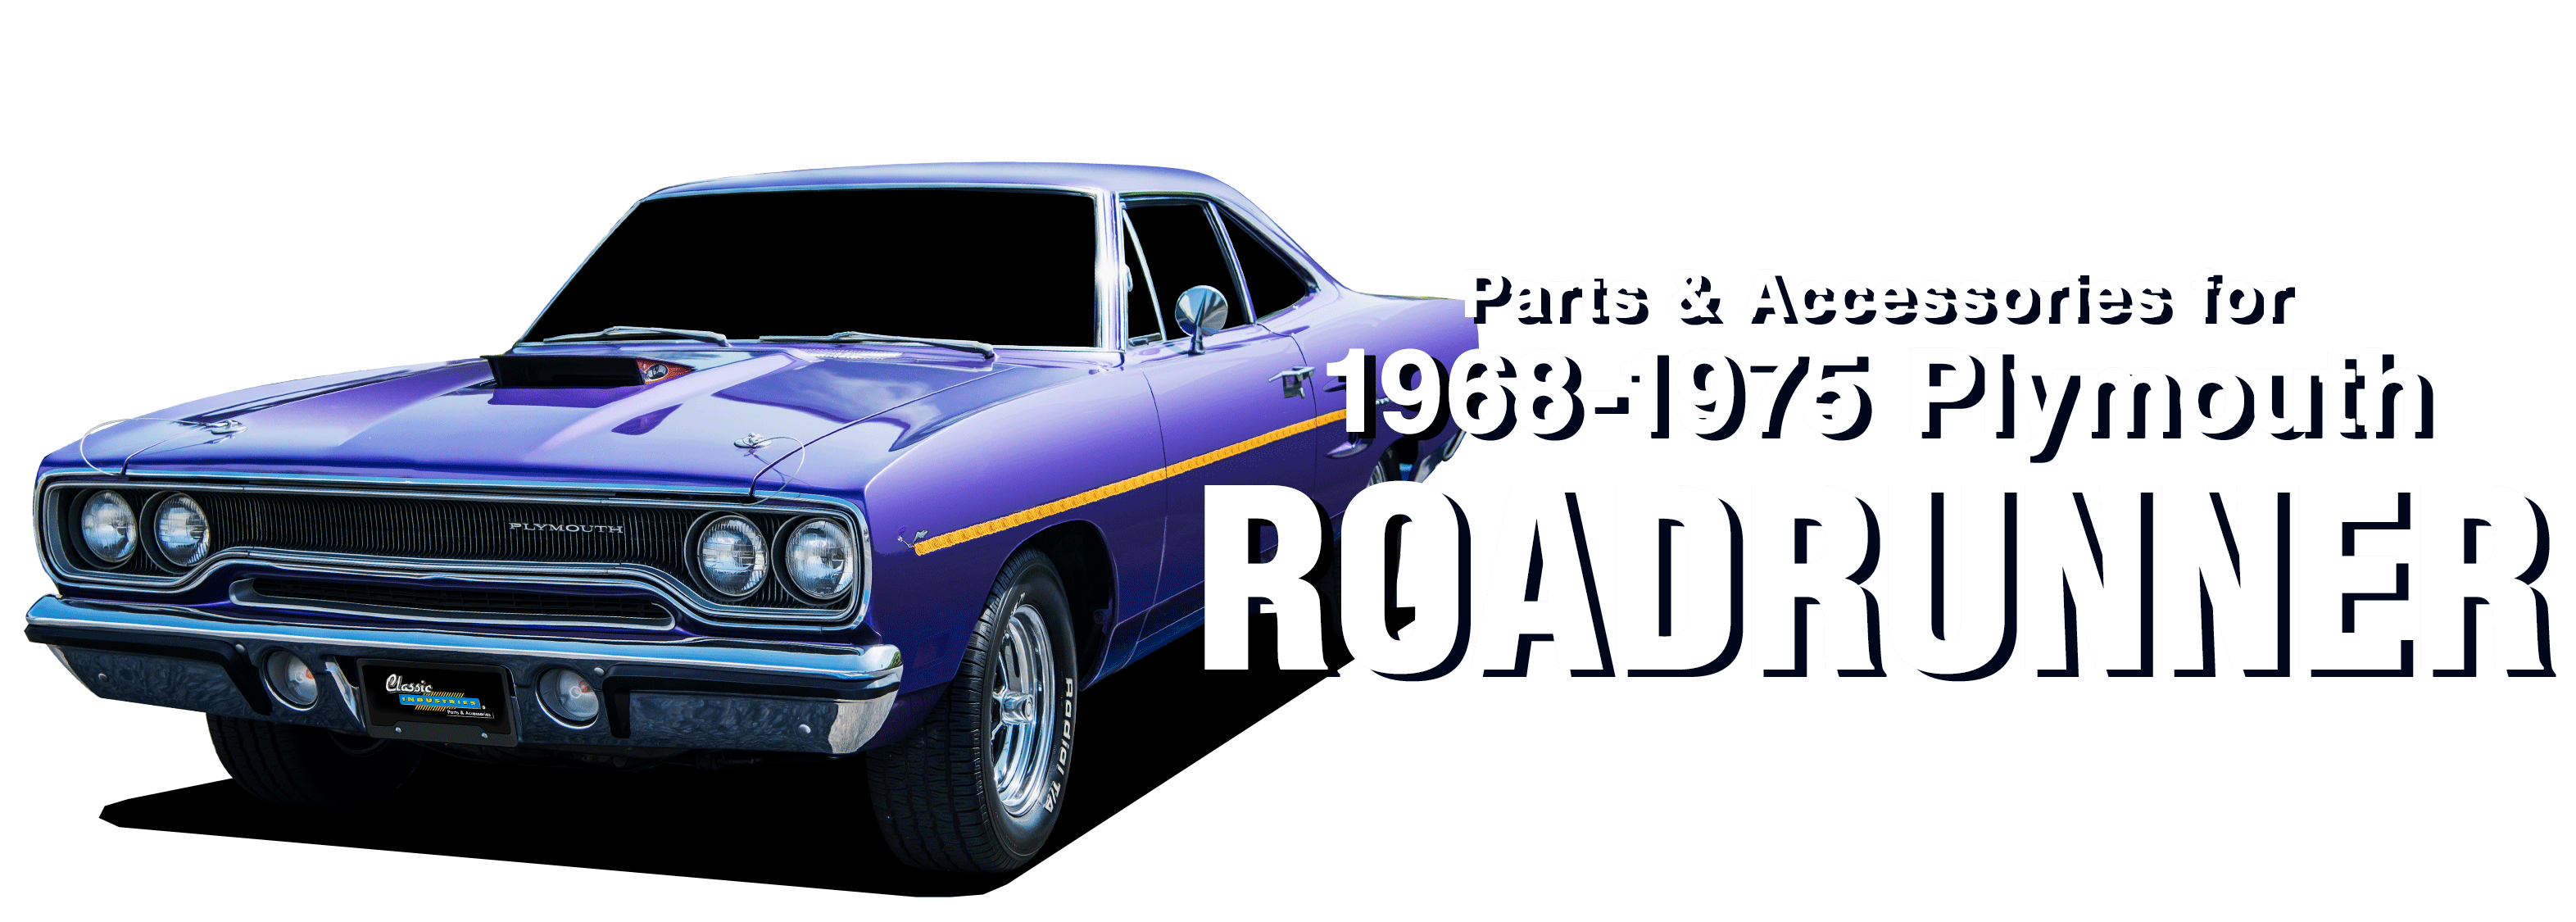 Parts & Accessories for 1968-1975 Plymouth Roadrunner